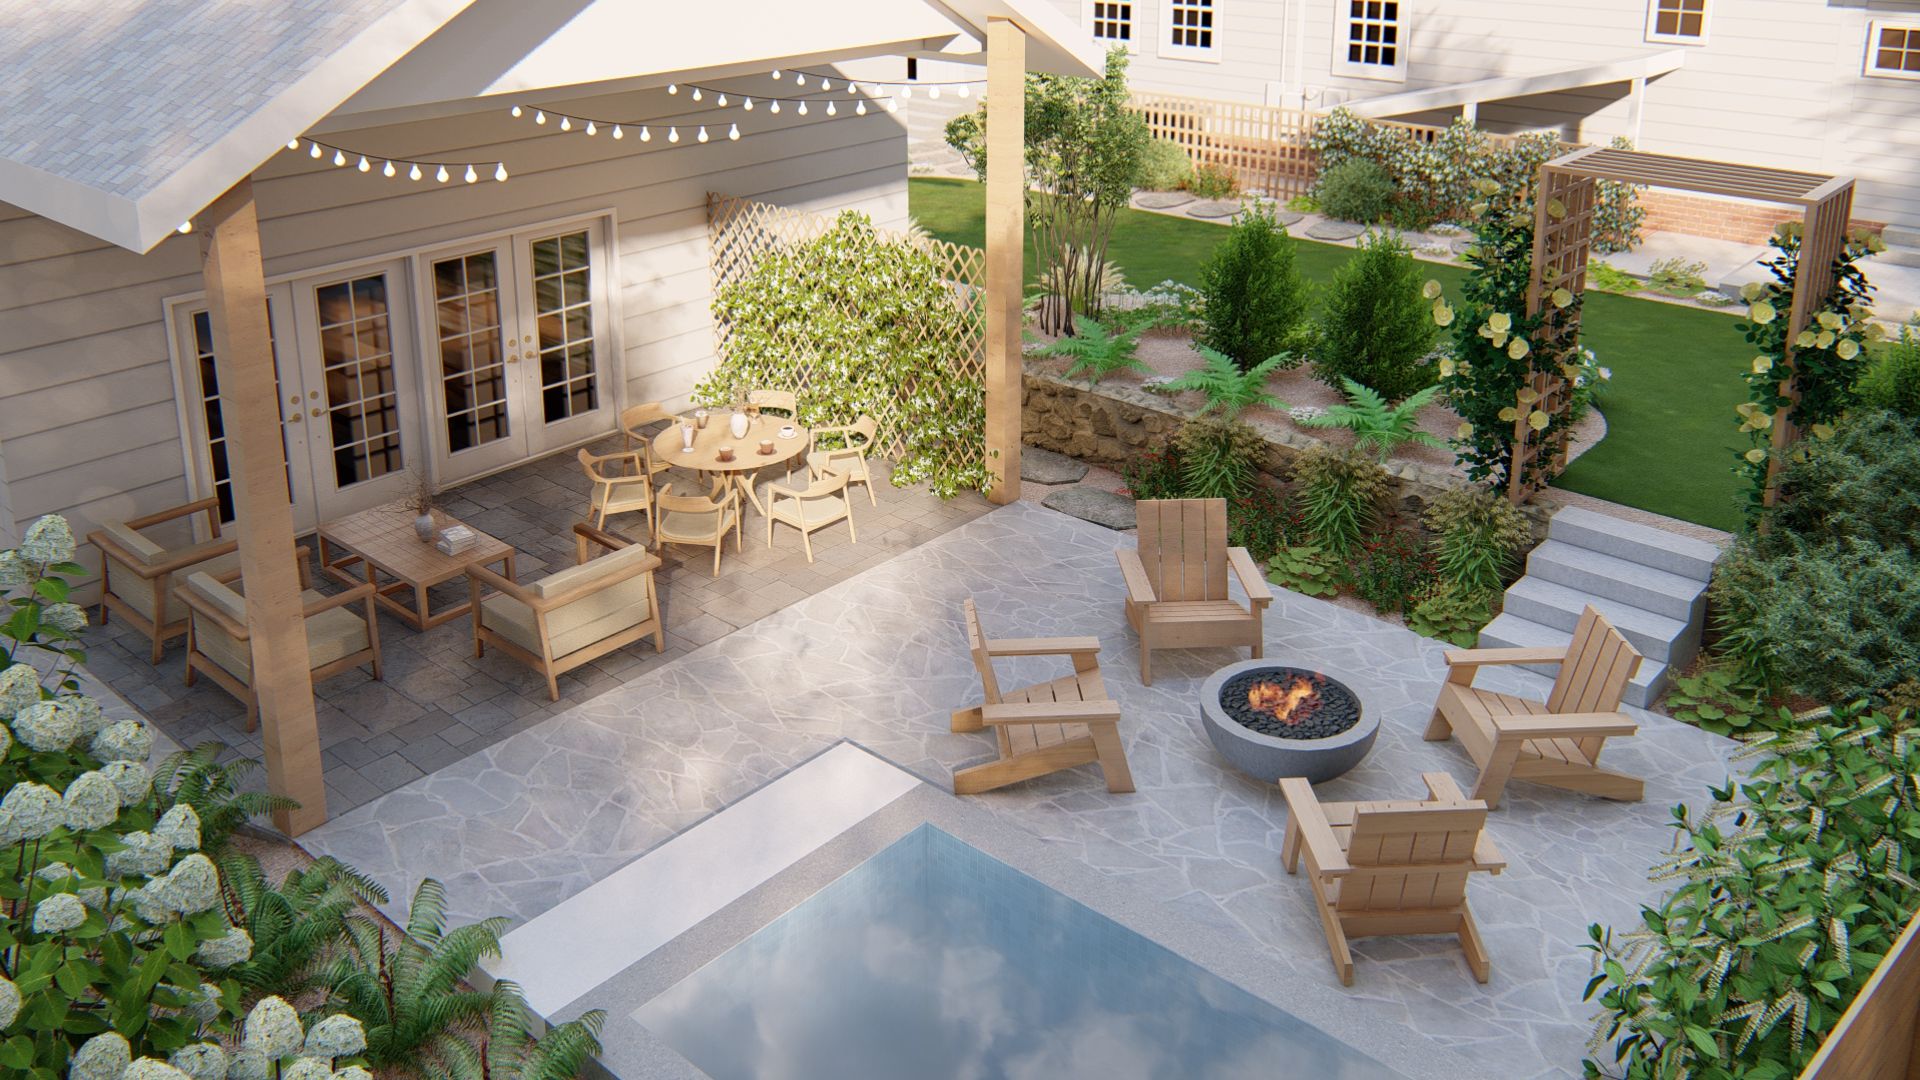 a cold plunge pool with a fire pit and lounge area nearby. A trellis with flowering vines is a beautiful entry to the pool deck area. 